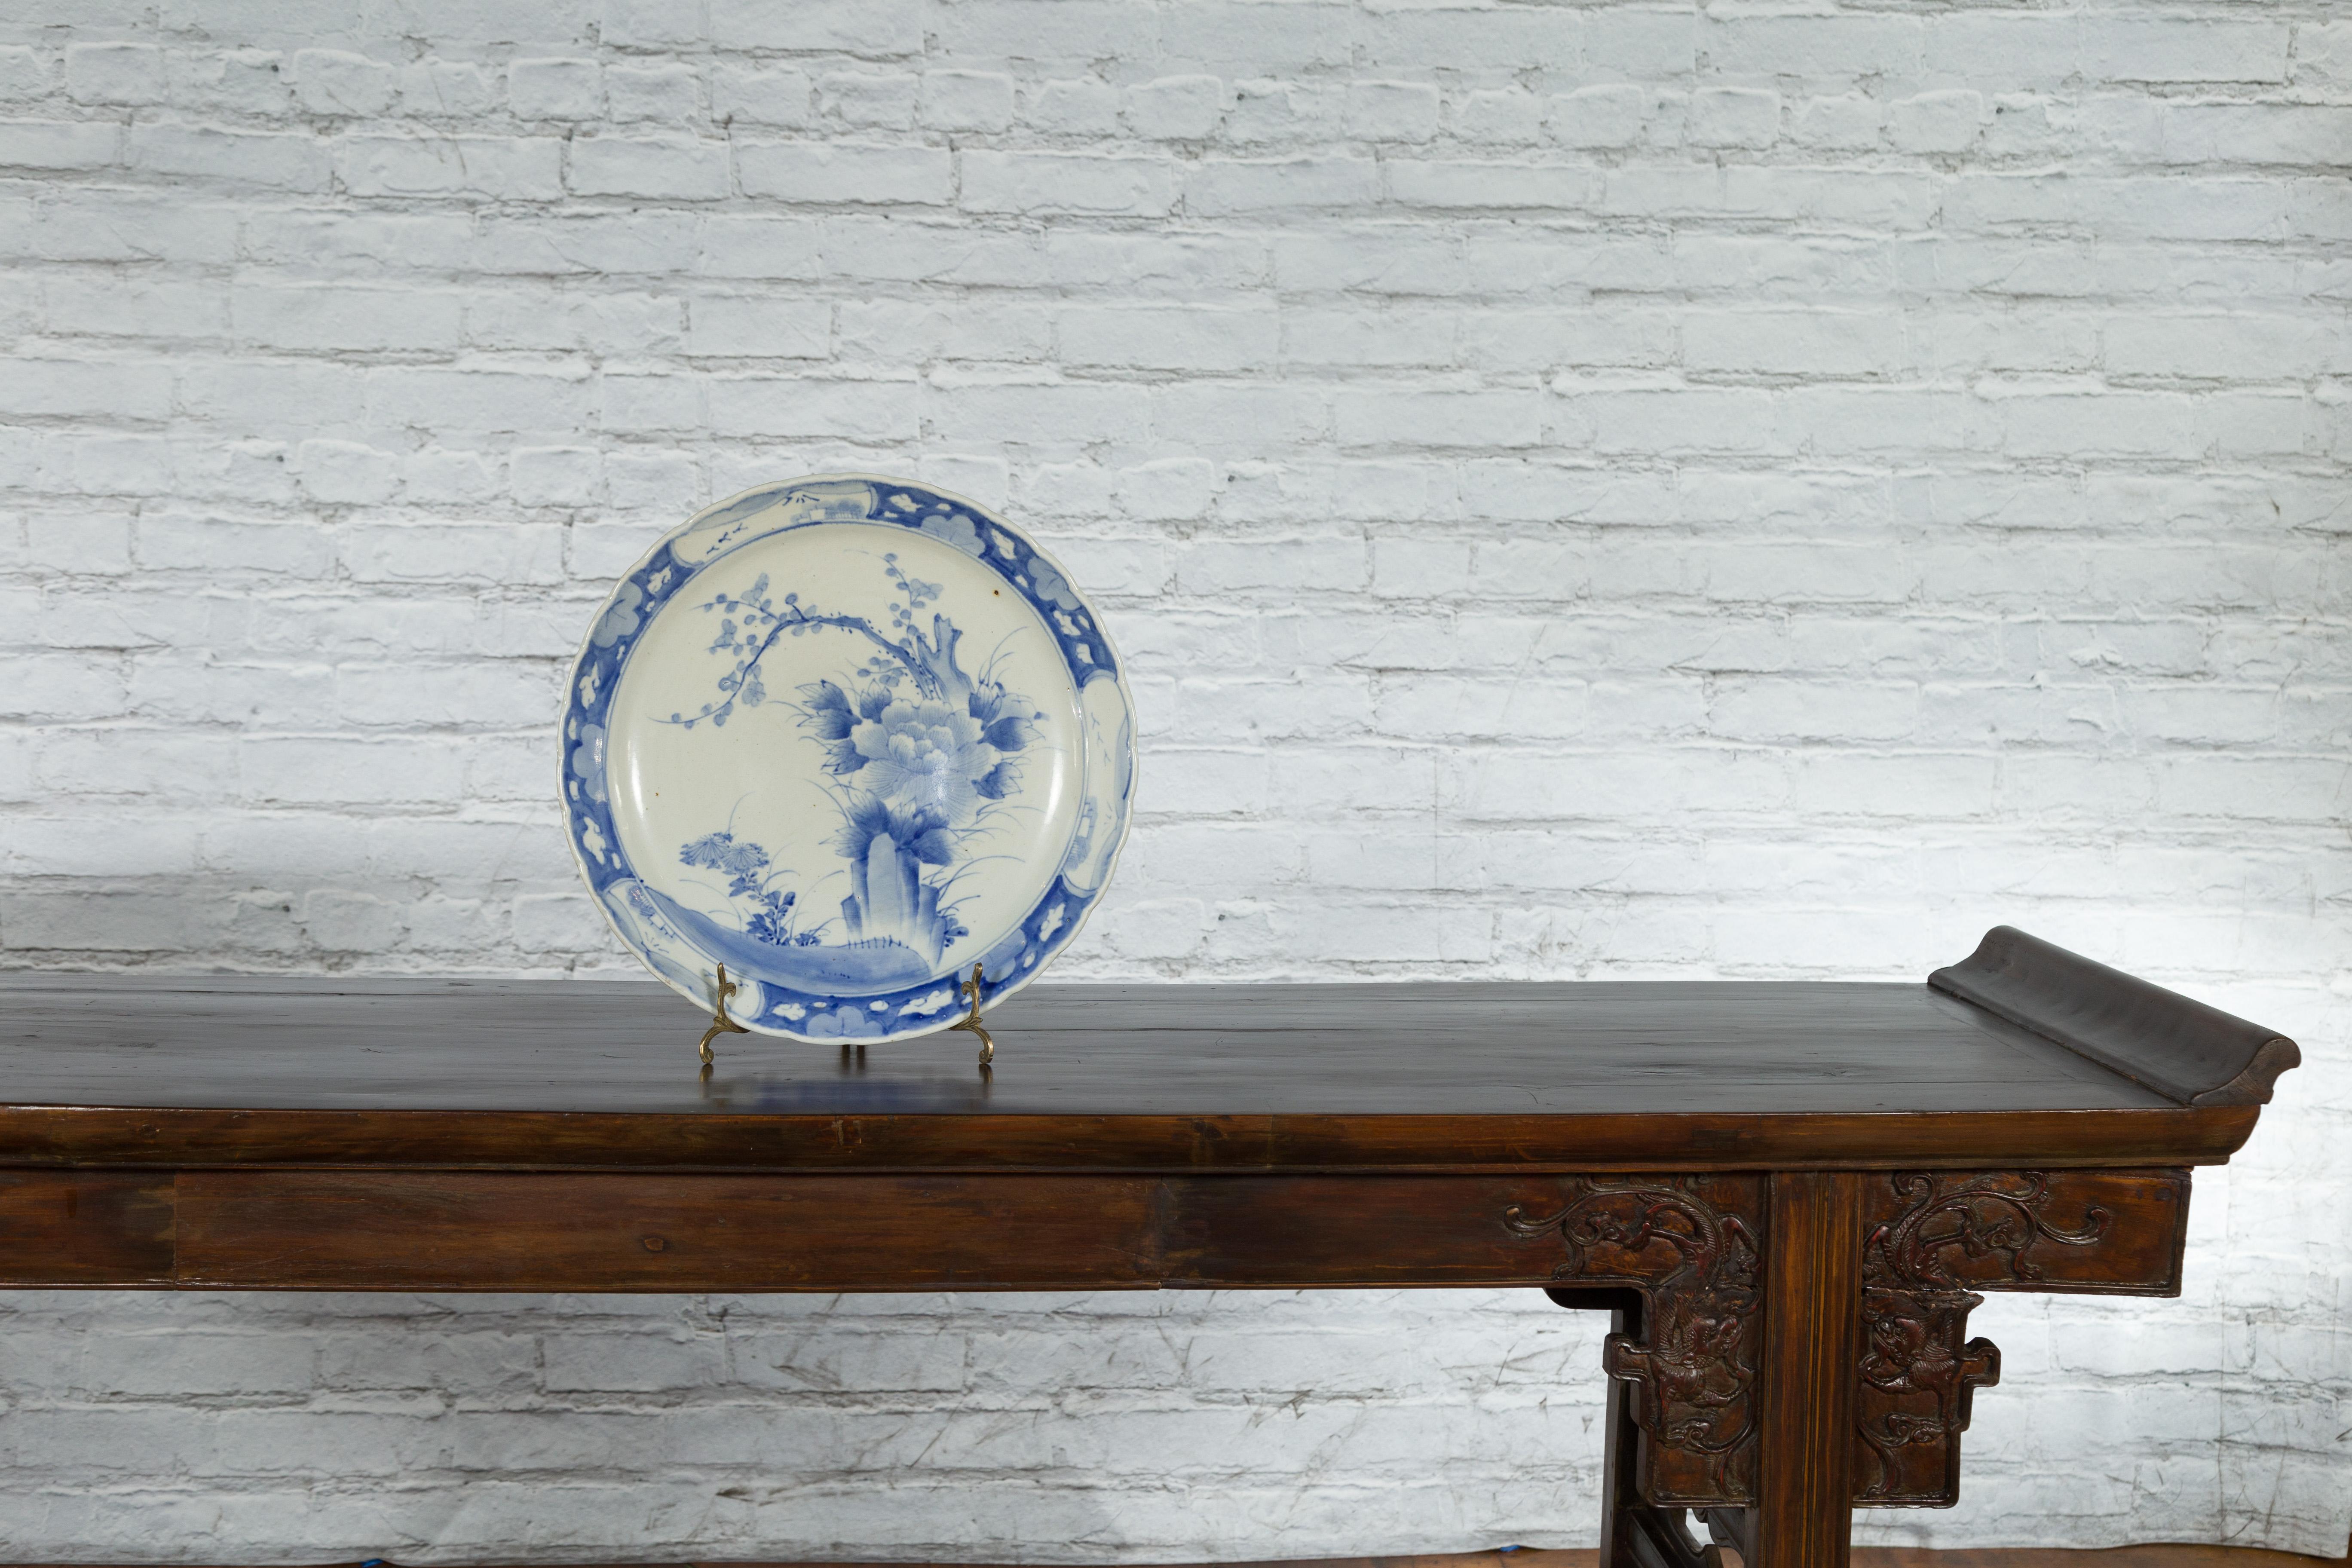 19th Century Japanese Porcelain Plate with Painted Blue and White Tree Décor In Good Condition For Sale In Yonkers, NY